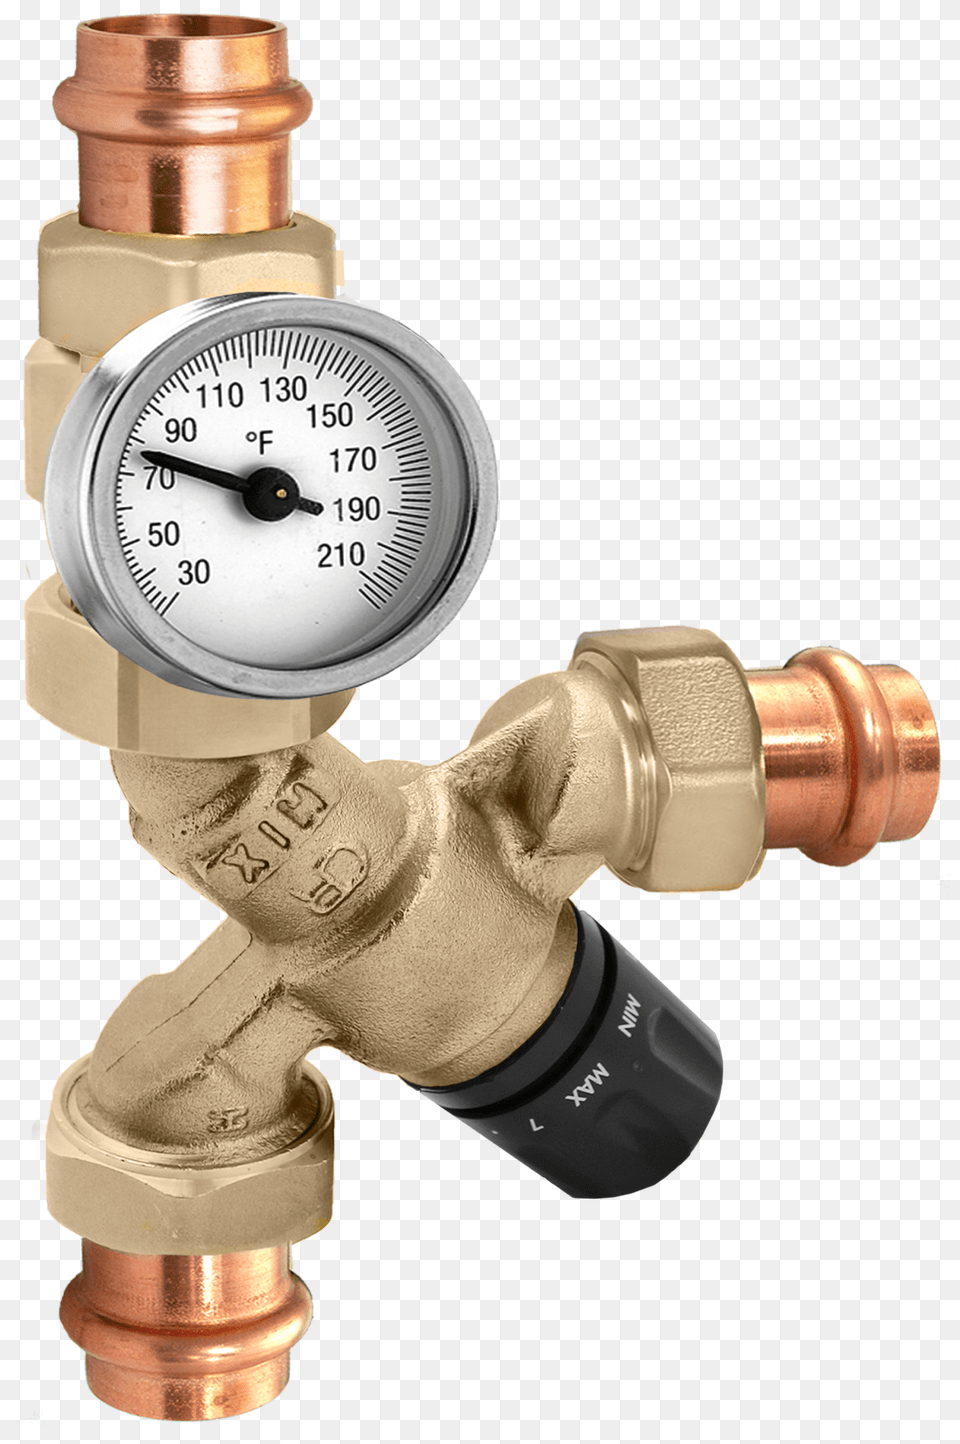 Angling In On Savings With Anglemix Brass, Bronze, Tape, Gauge Png Image